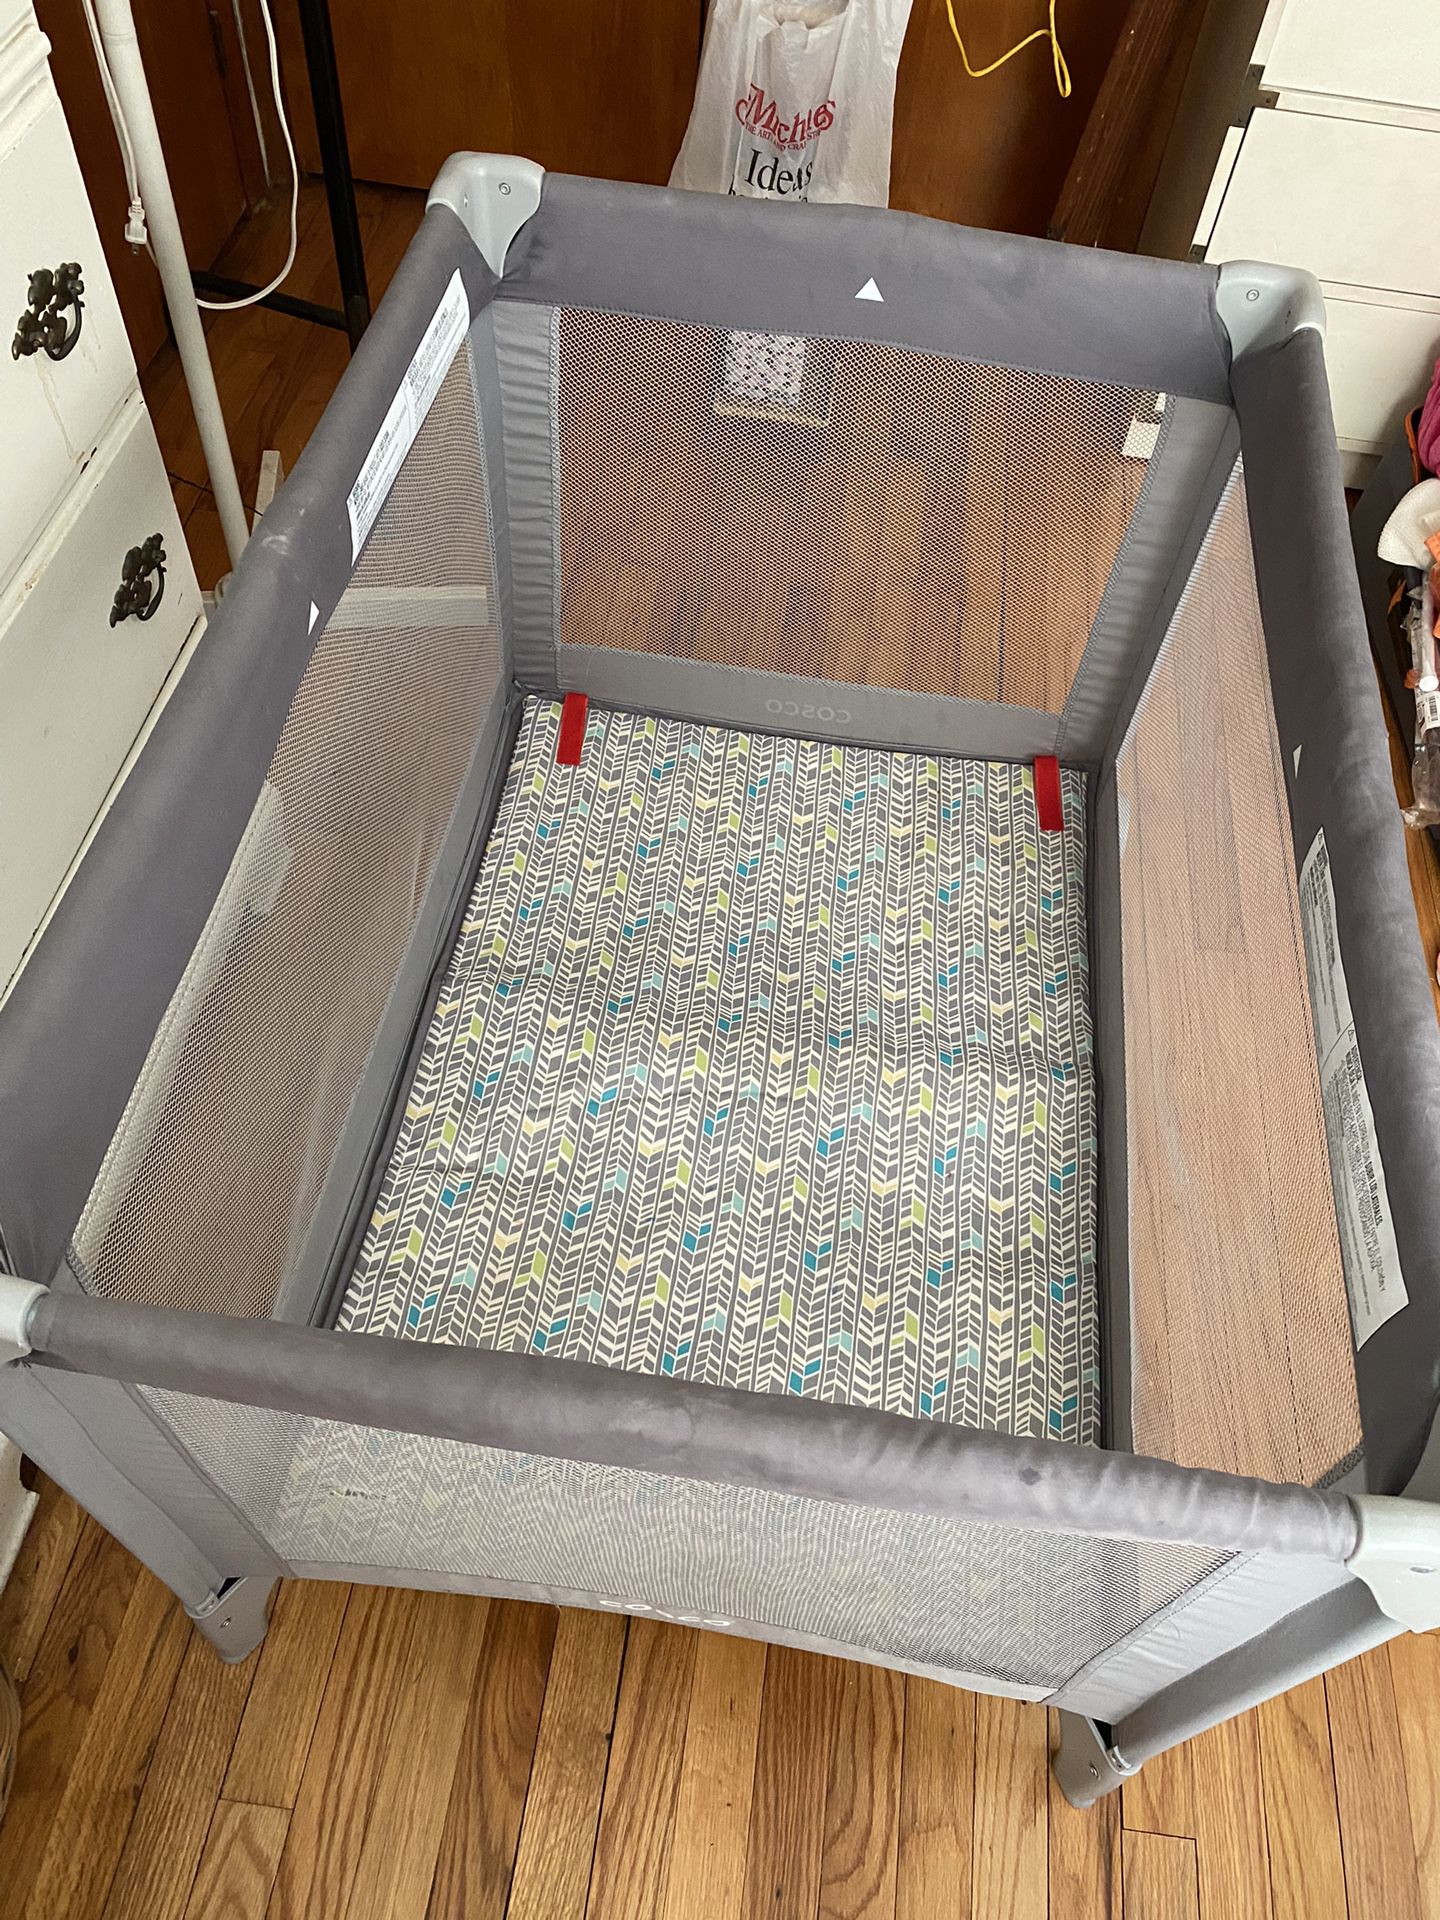 Pack And Play - Playpen